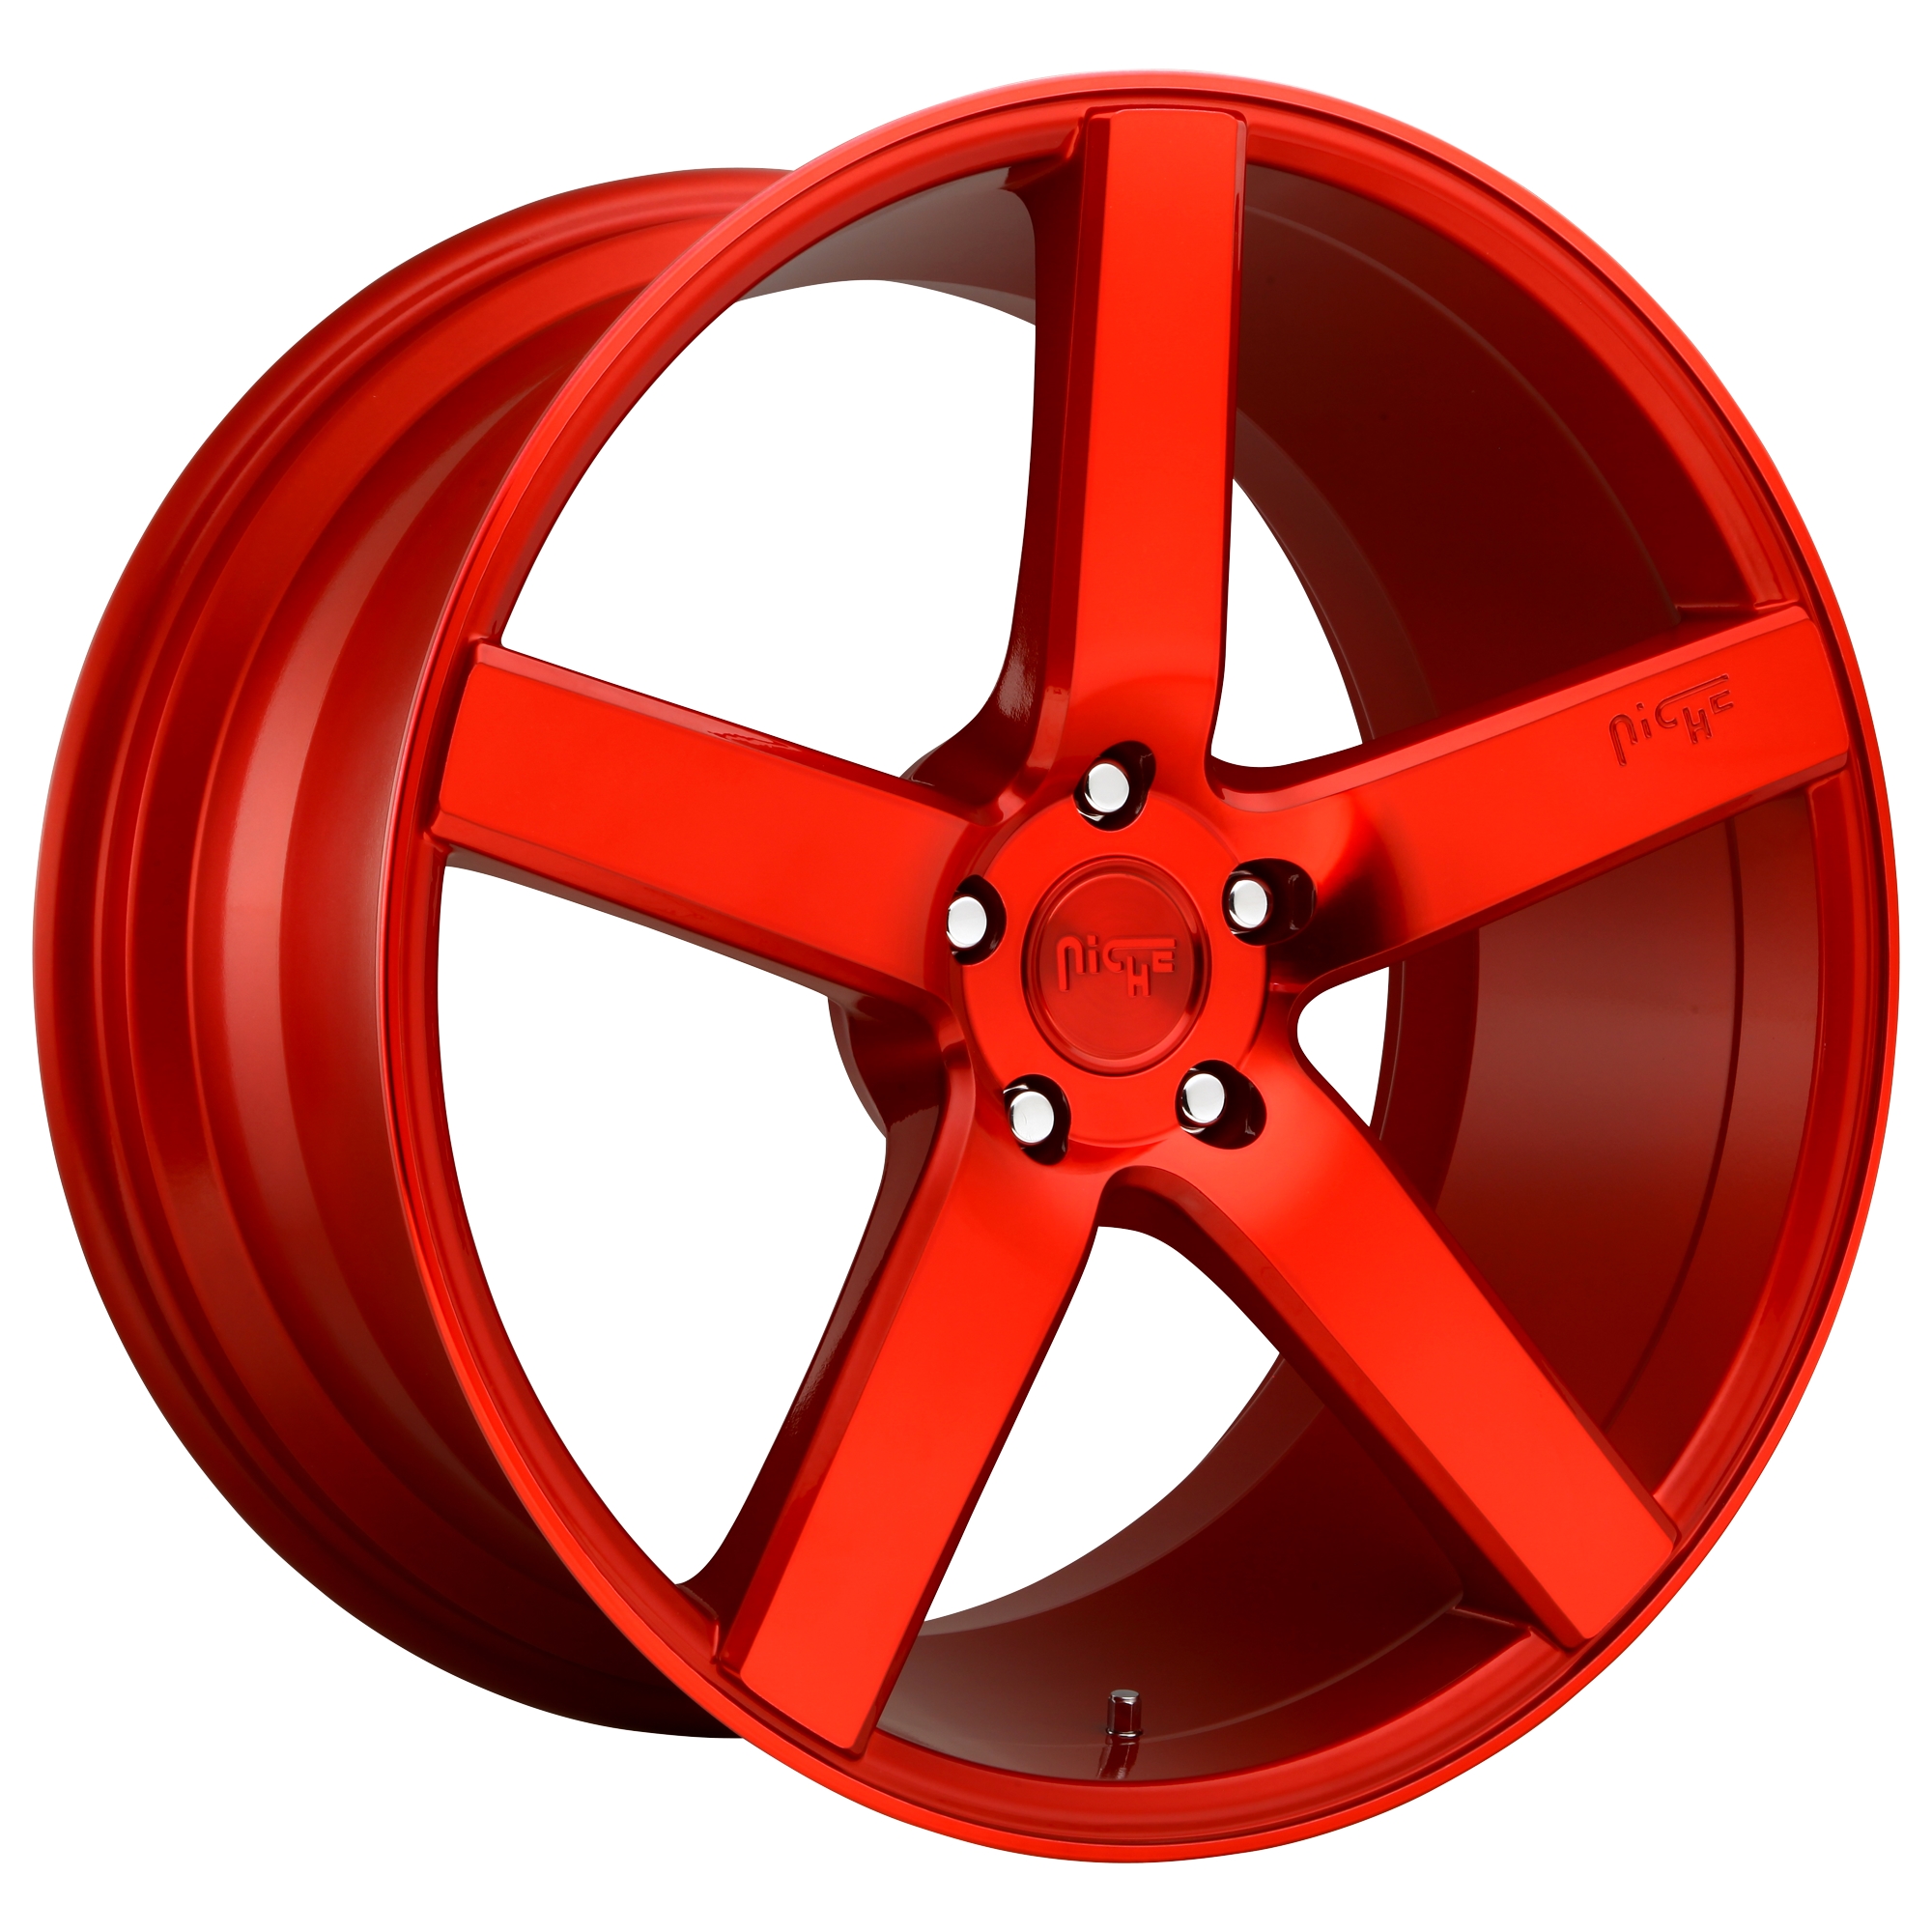 M187 MILAN   WHEELS AND RIMS PACKAGES